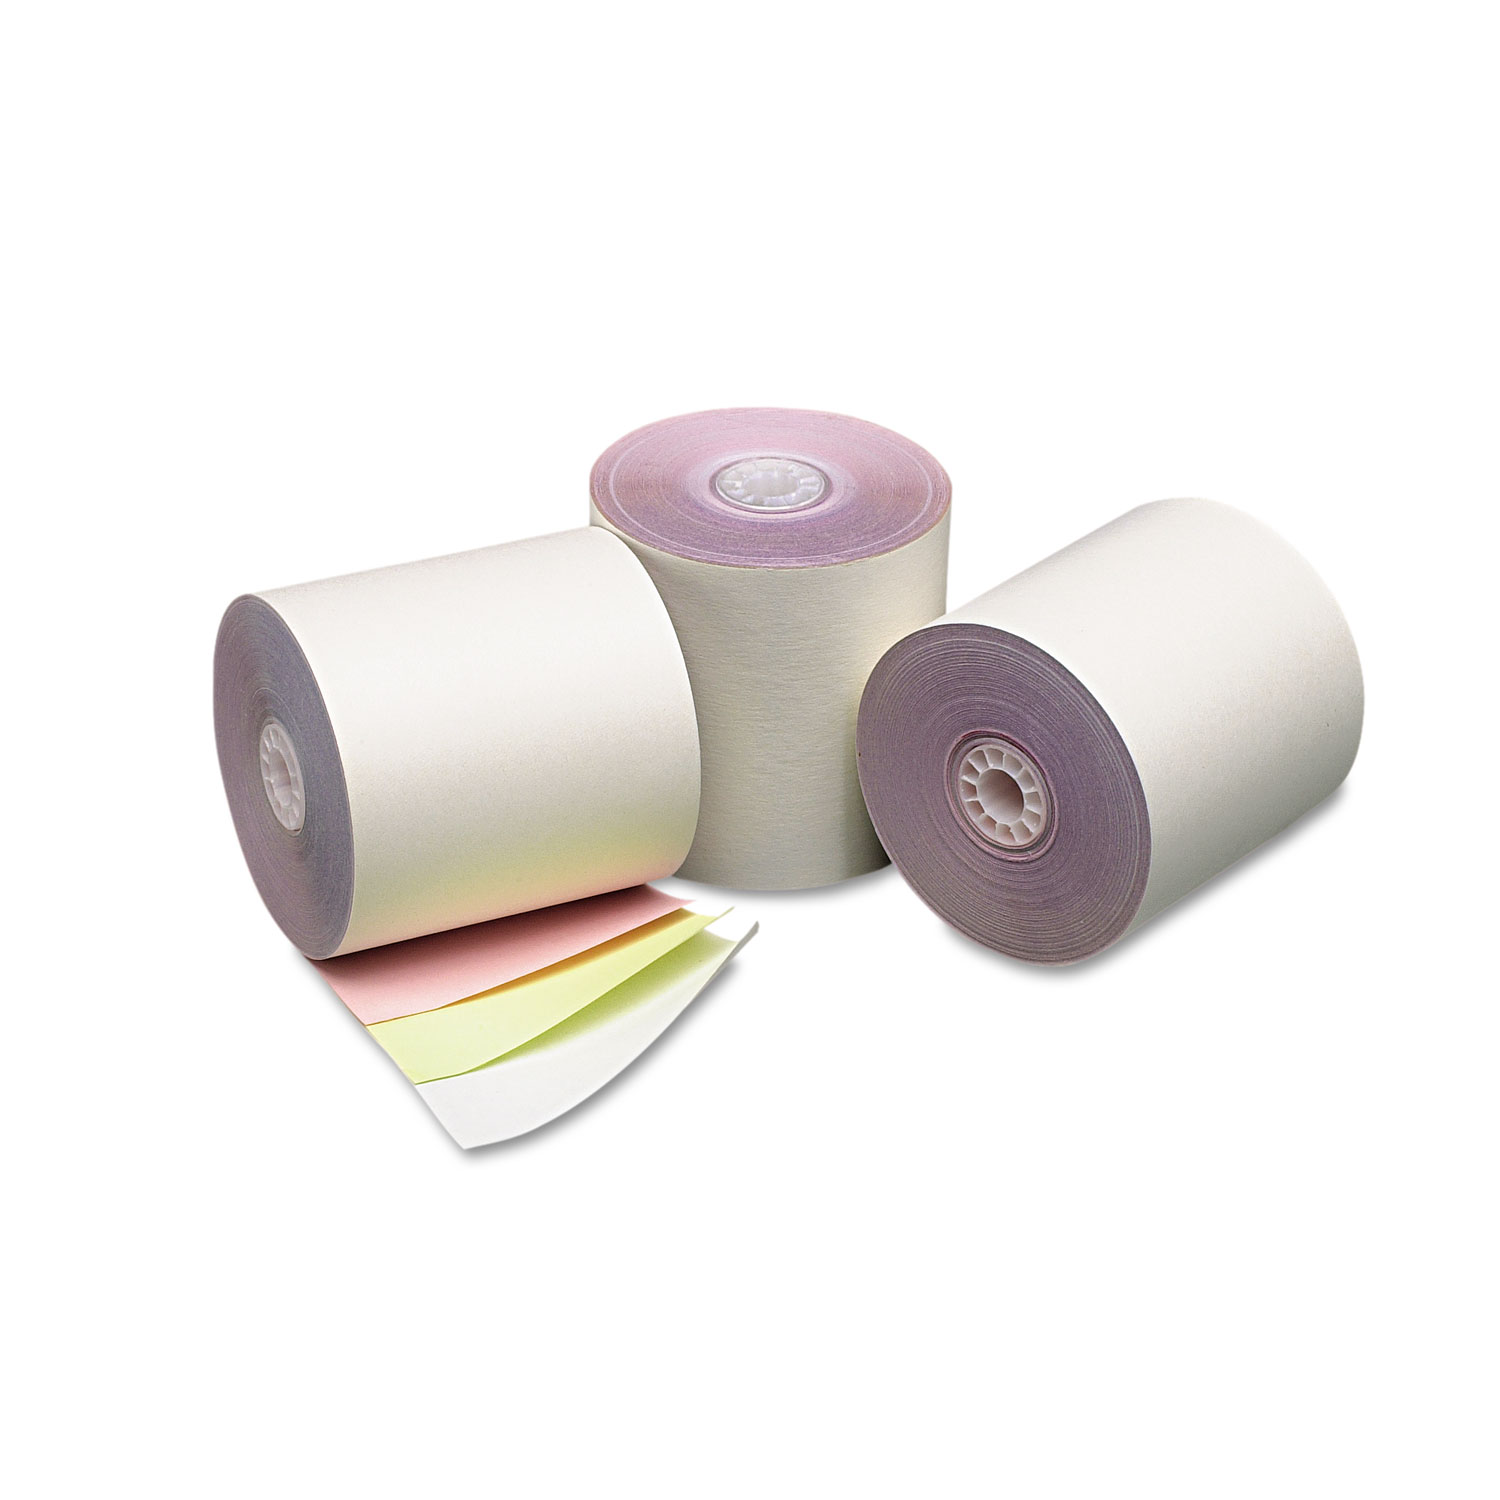 Three Ply Cash Register/POS Rolls, 3 x 70 ft., White/Canary/Pink, 50/Carton